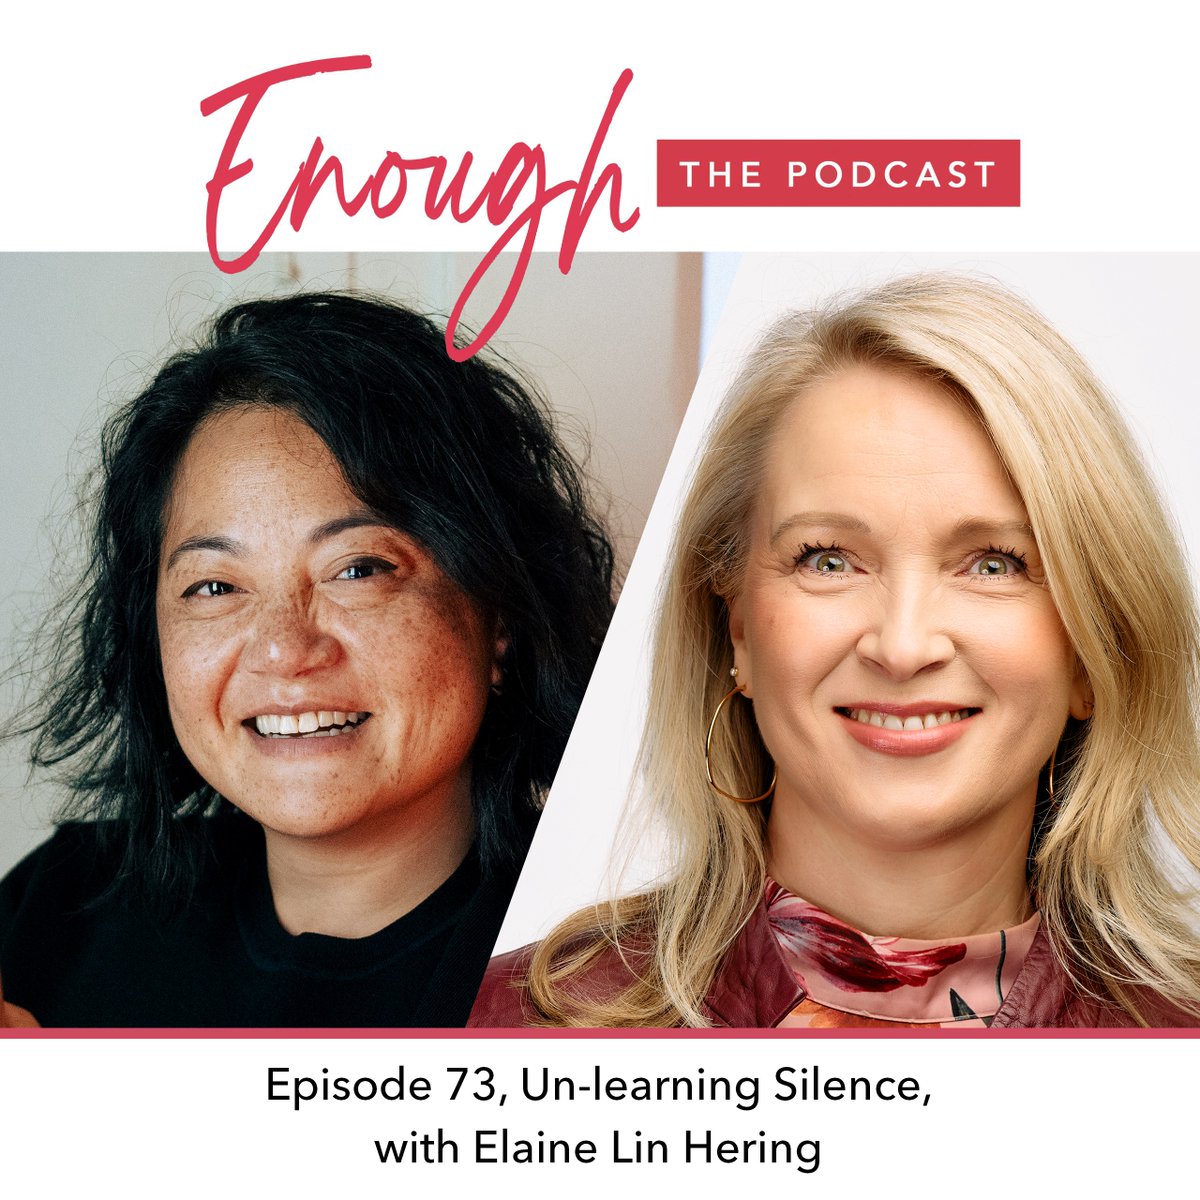 Fantastic interview with @elainelinhering on Enough, the Podcast: Episode 73: #UnlearningSilence. Thank you @mandylehto for this discussion on an issue which affects us all, particularly women in the workplace. Having a seat at the table doesn't always mean having a voice.